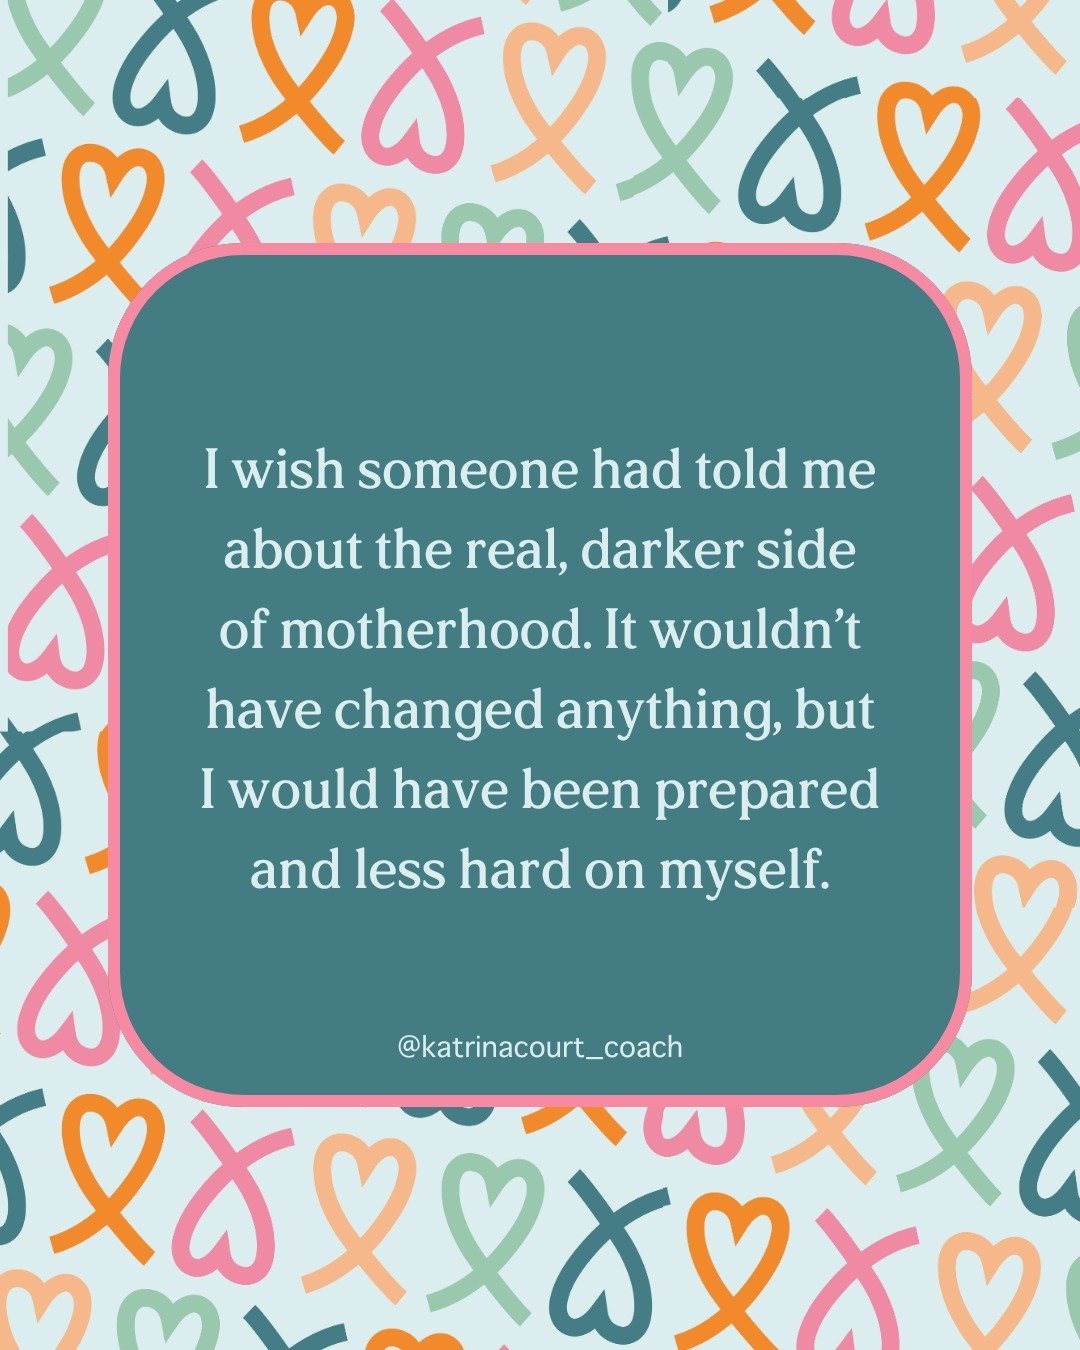 Now here's a truth

I wish someone had warned me about the real side of motherhood. 

The darker side, that would shock me to my core.

Not to scare me, but to prepare me. 

So that when it happened, I would understand that matrescence is meant to be